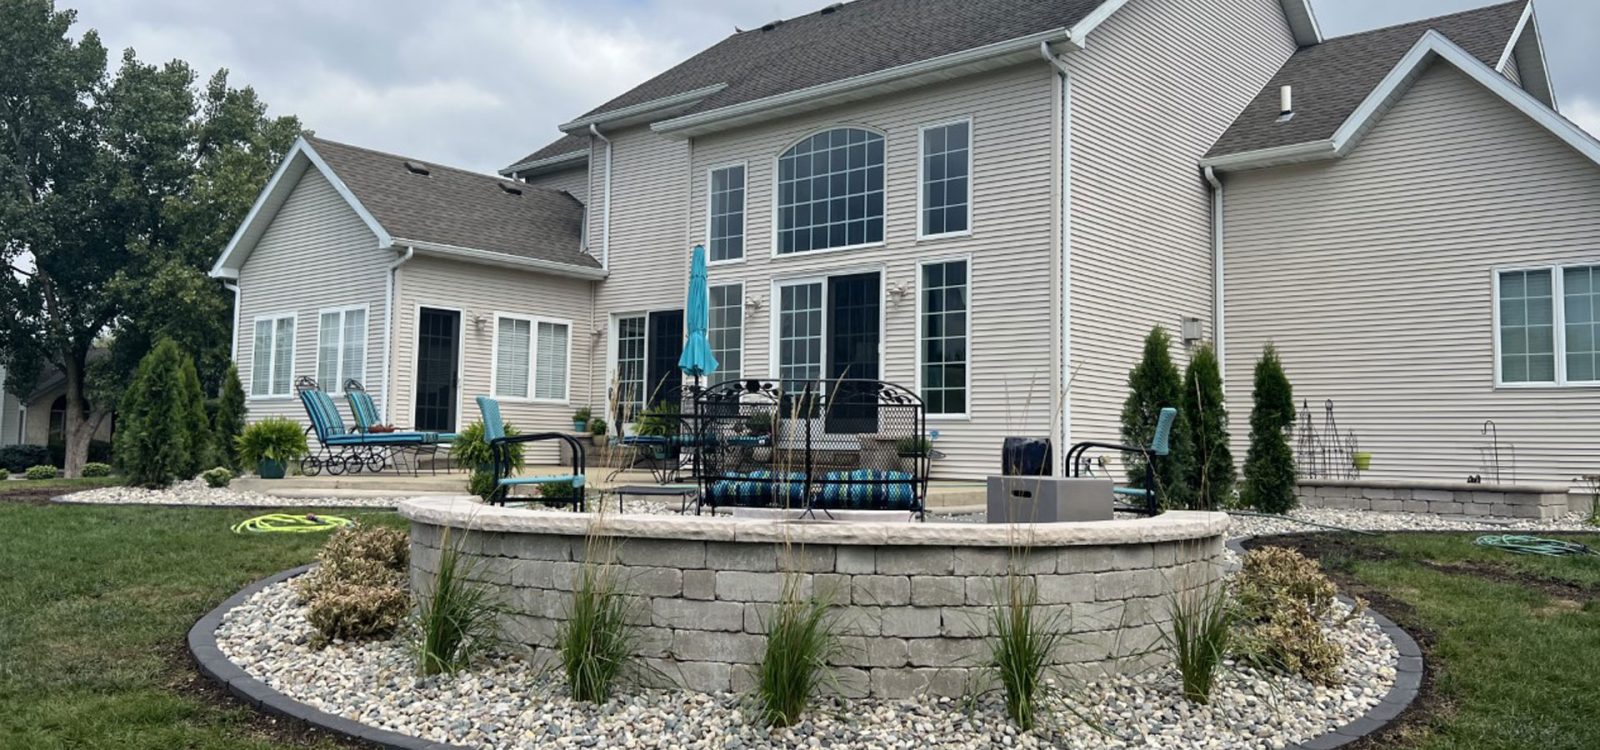 Ready to elevate your outdoor living with captivating hardscapes?